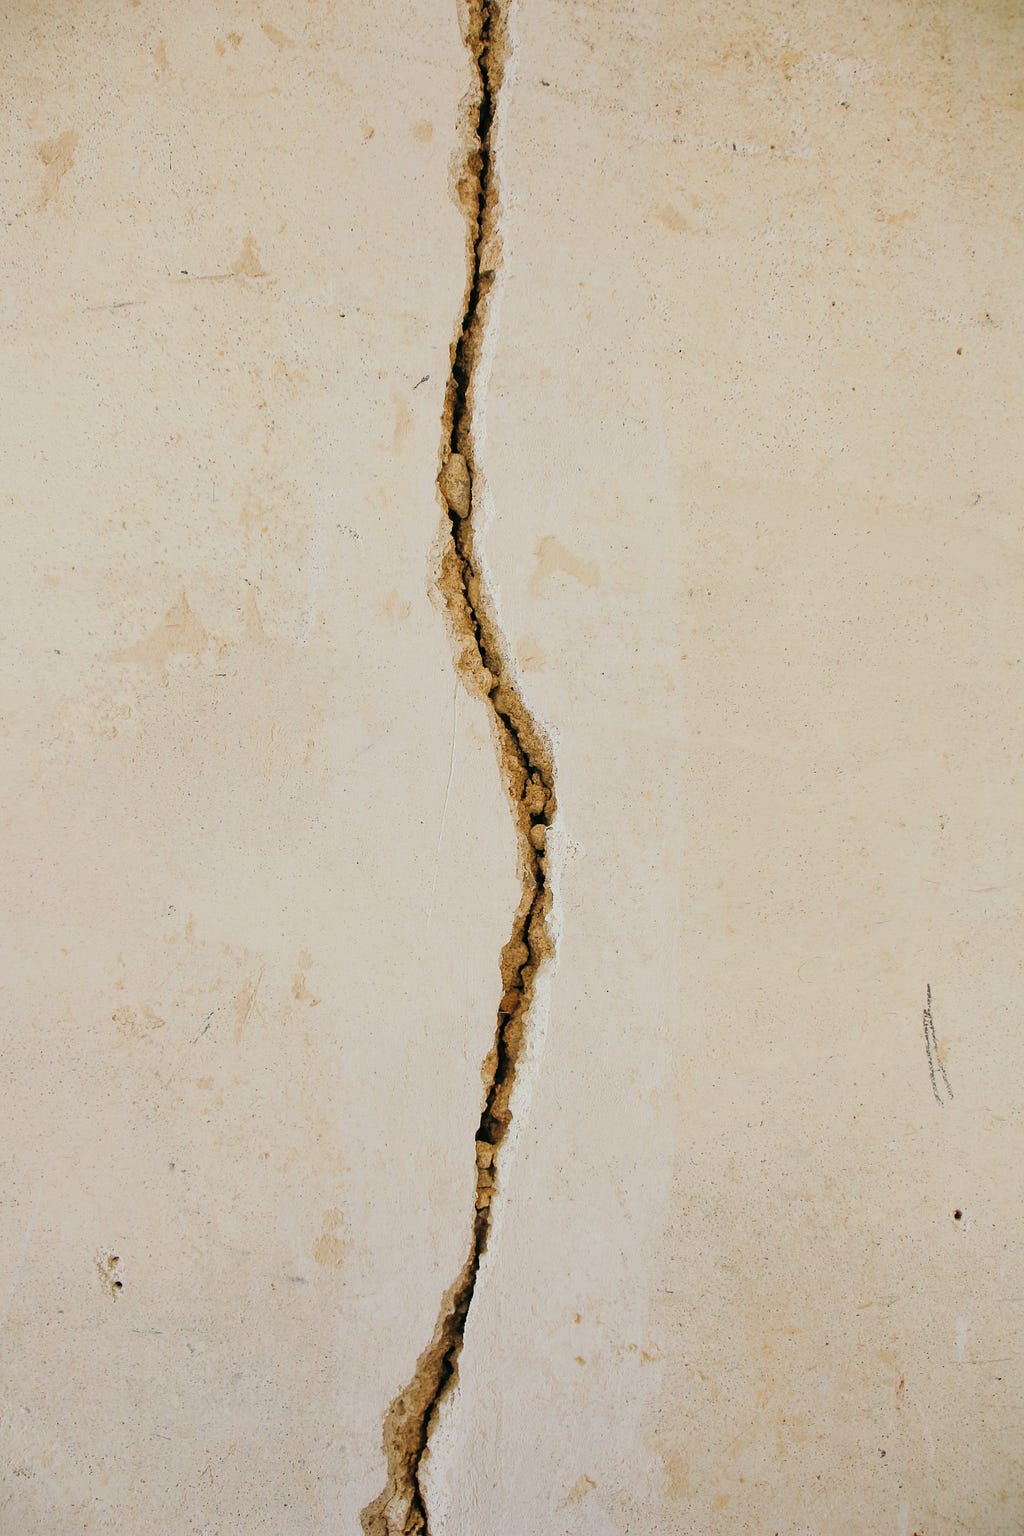 Cracks in the earth.